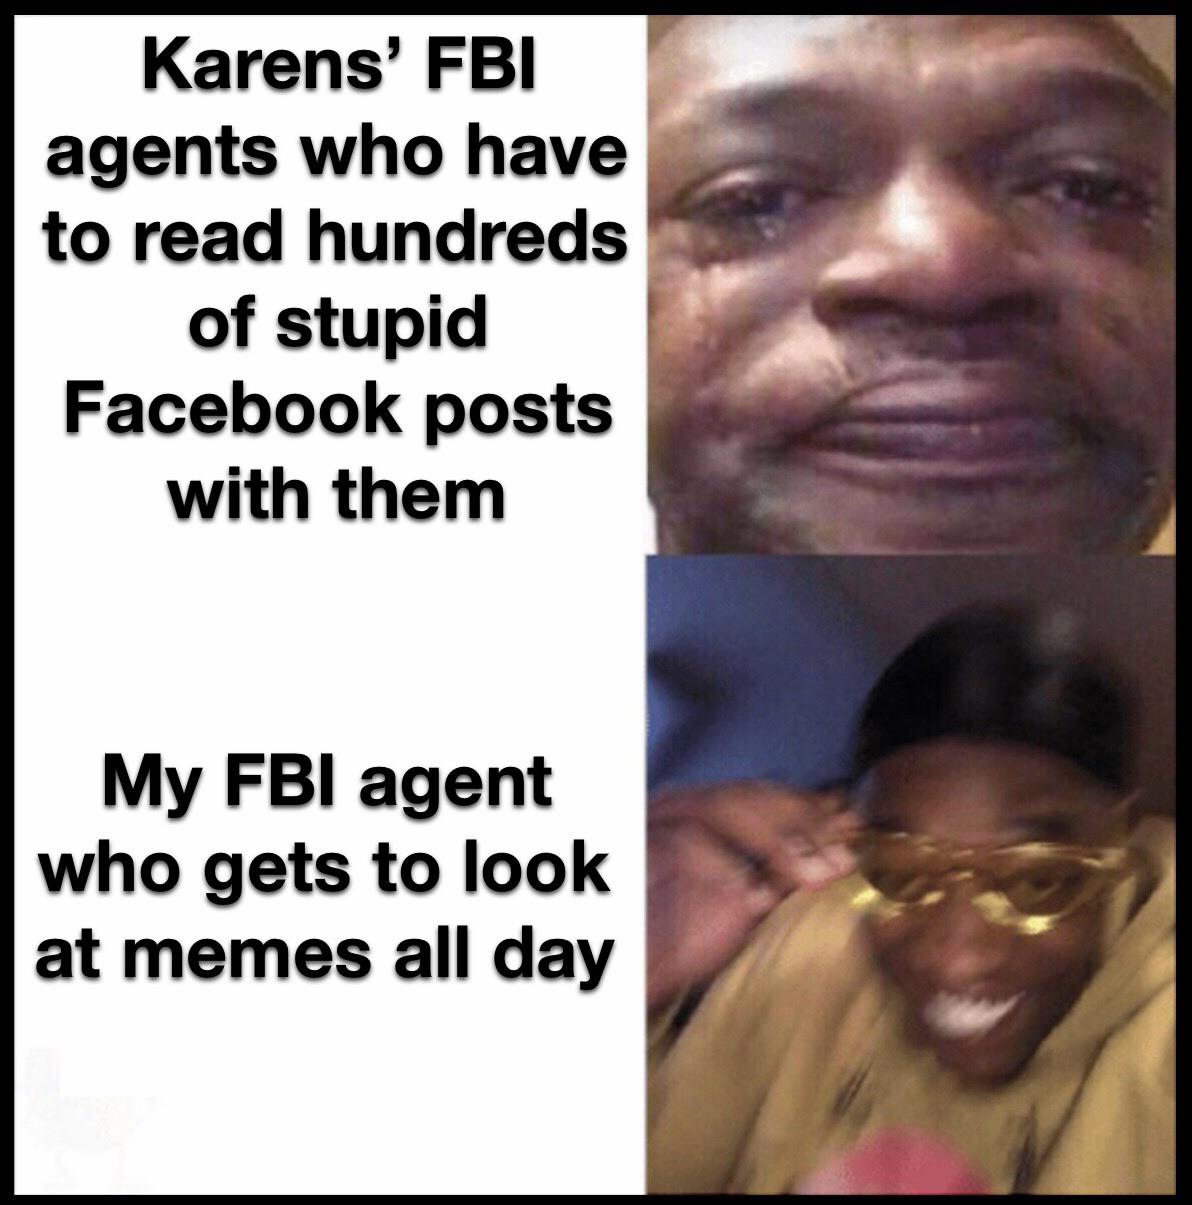 Funny, NSA, Karen, Shrek, Kyle, JoJo other memes Funny, NSA, Karen, Shrek, Kyle, JoJo text: Karens' FBI agents who have to read hundreds of stupid Facebook posts with them My FBI agent who gets to look at memes all day 